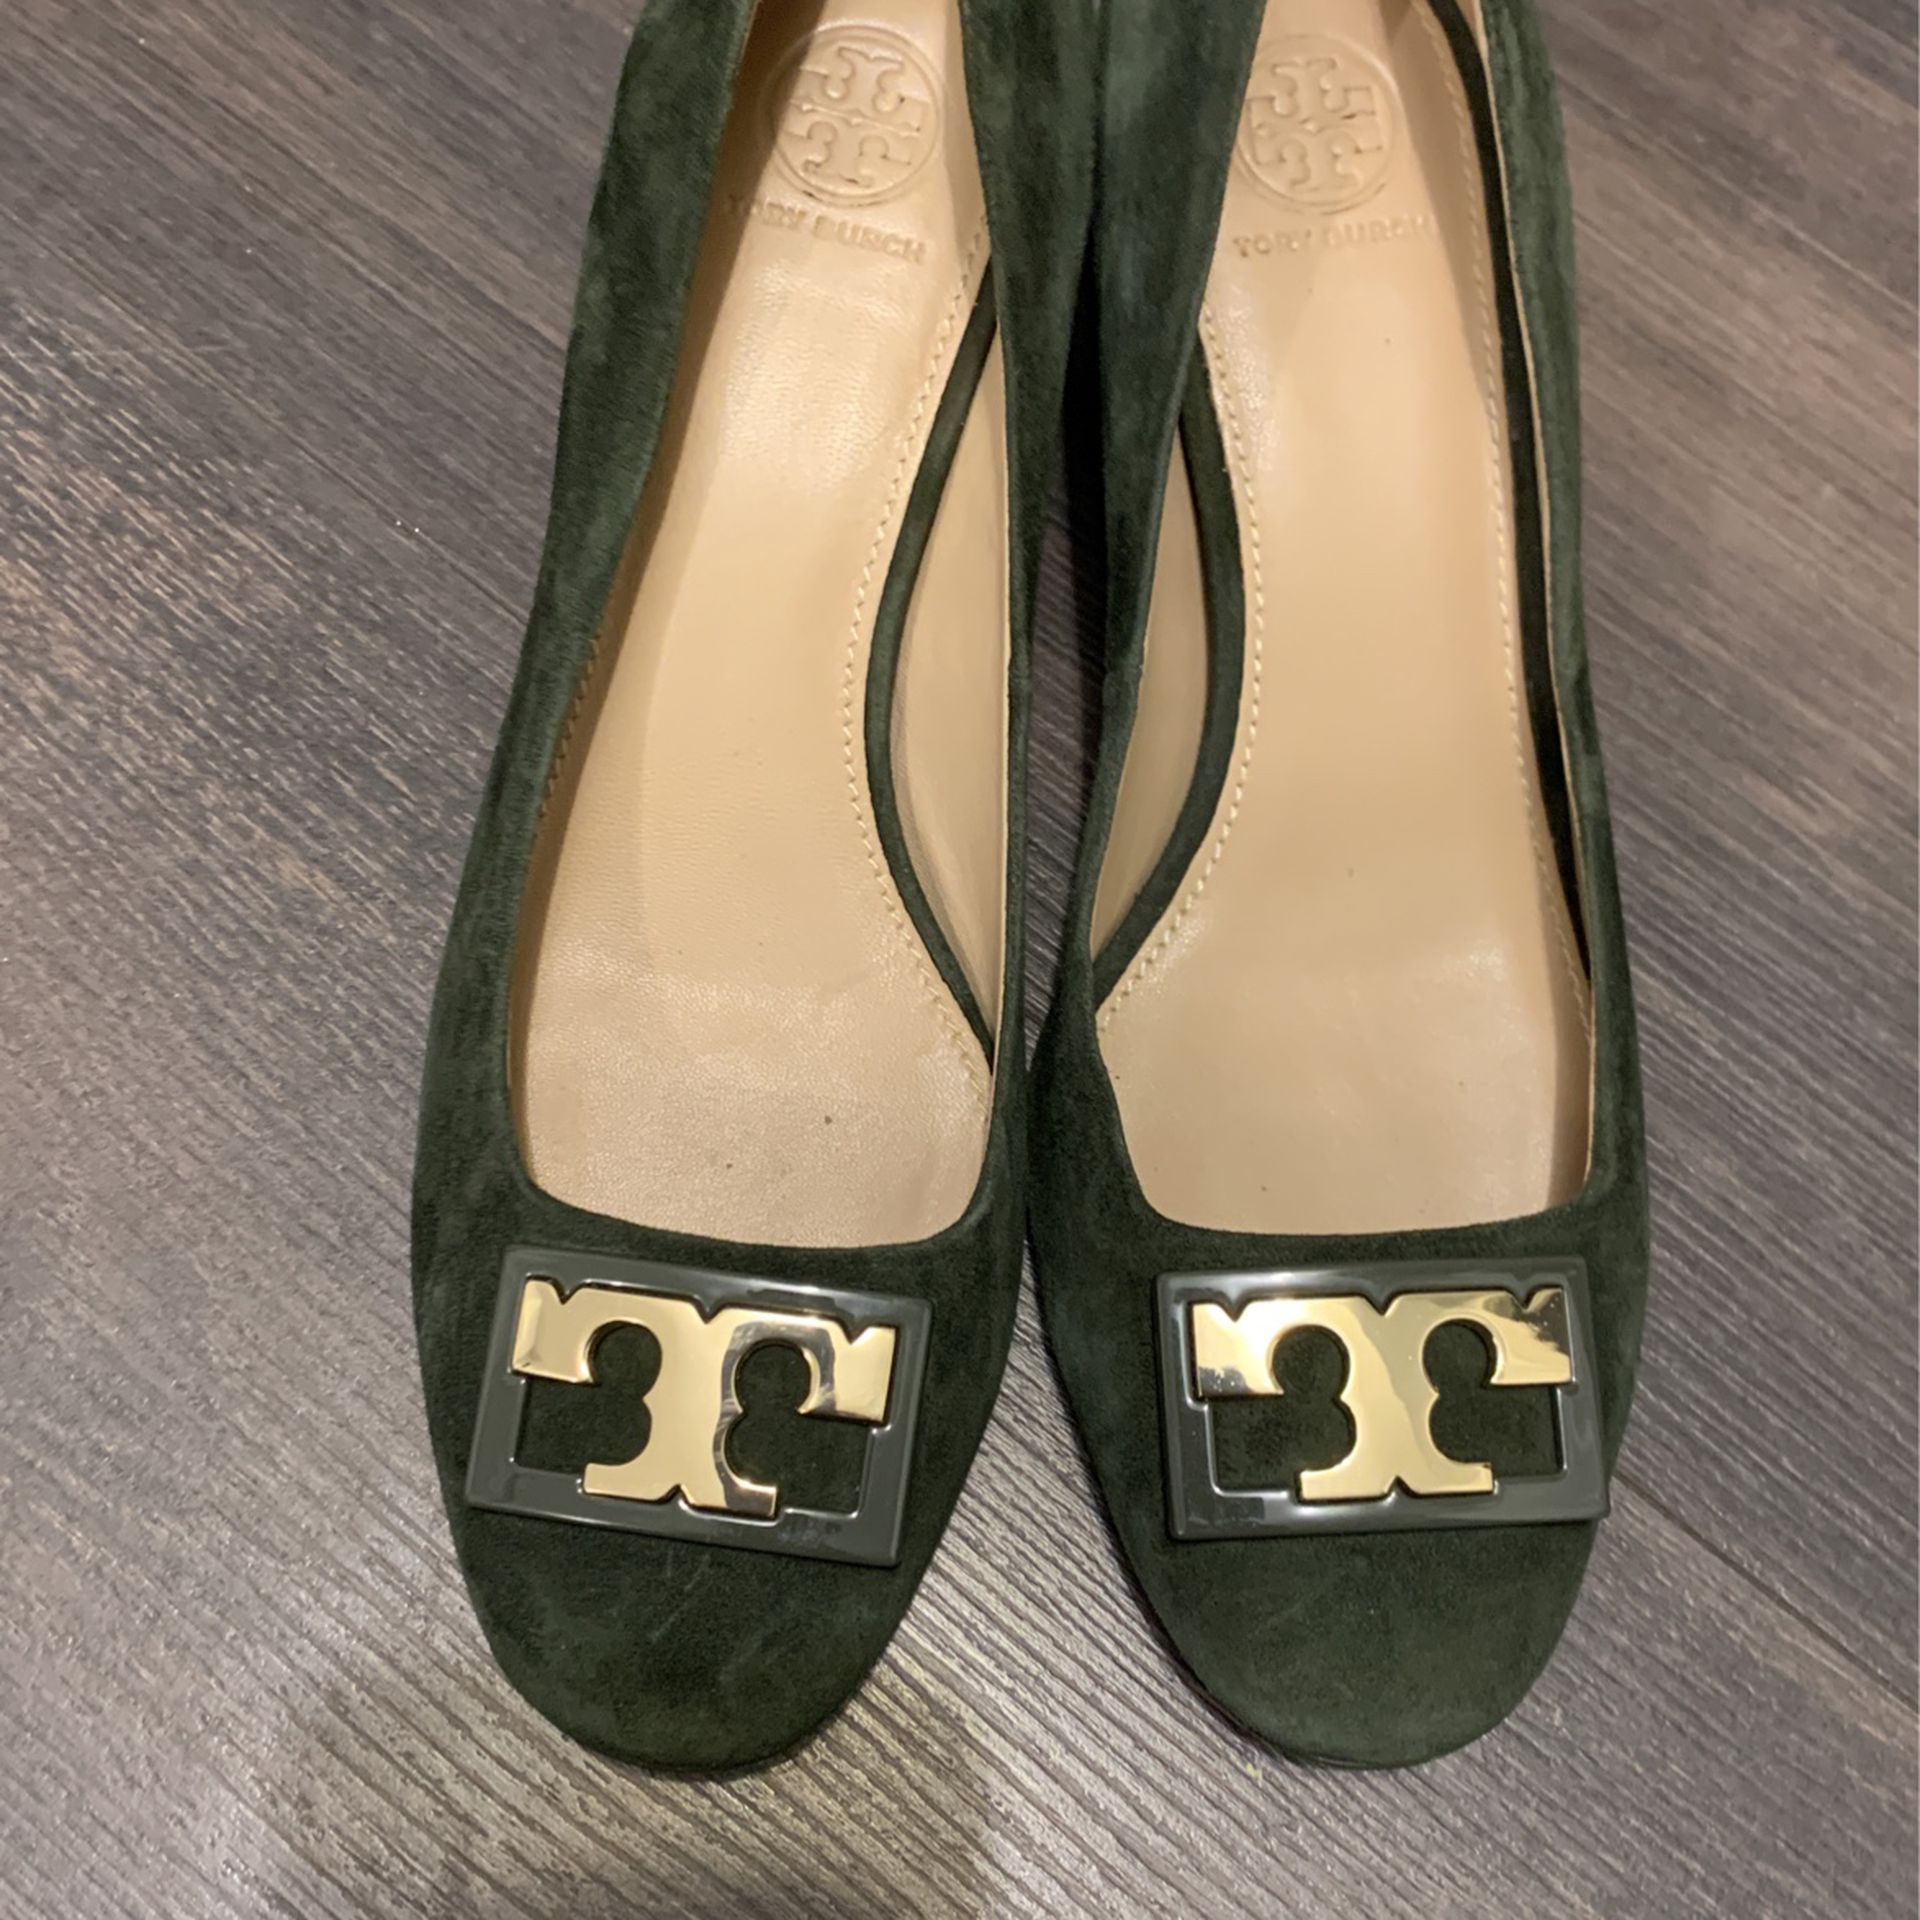 Tory Burch. Size 8 for Sale in Chicago, IL - OfferUp